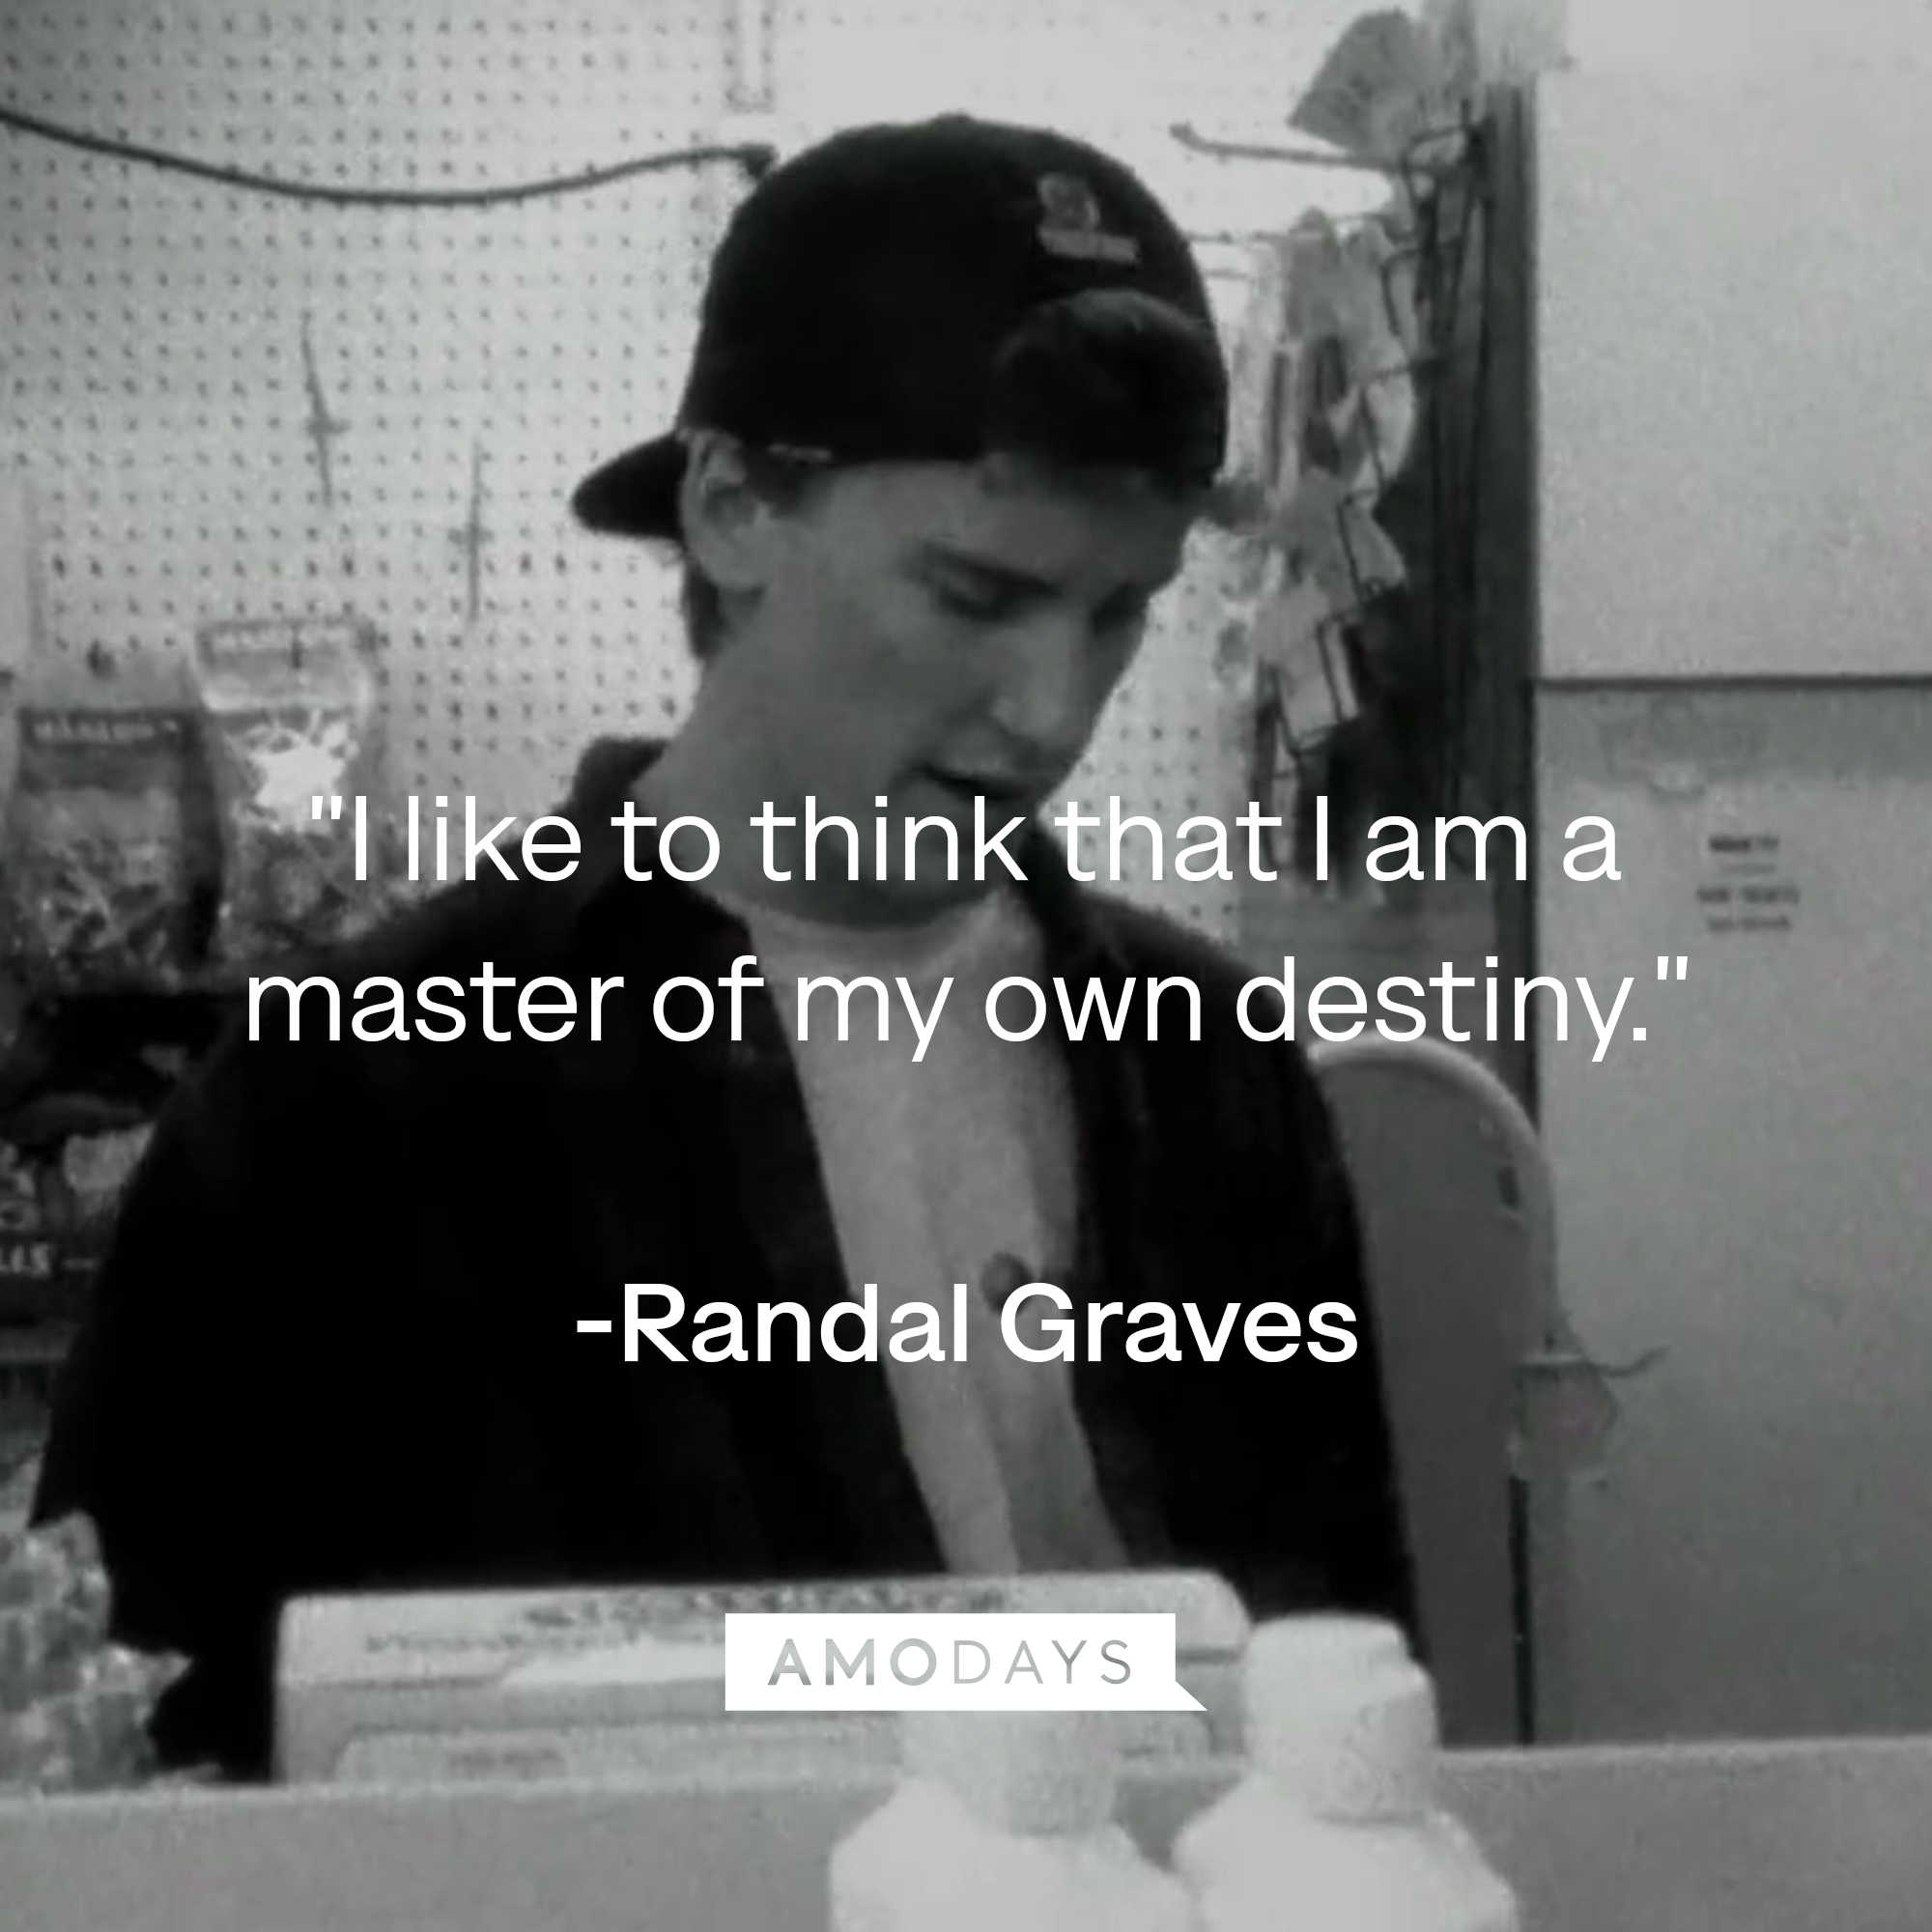 Randal Graves' quote,  "I like to think that I am a master of my own destiny." | Source: Facebook/ClerksMovie